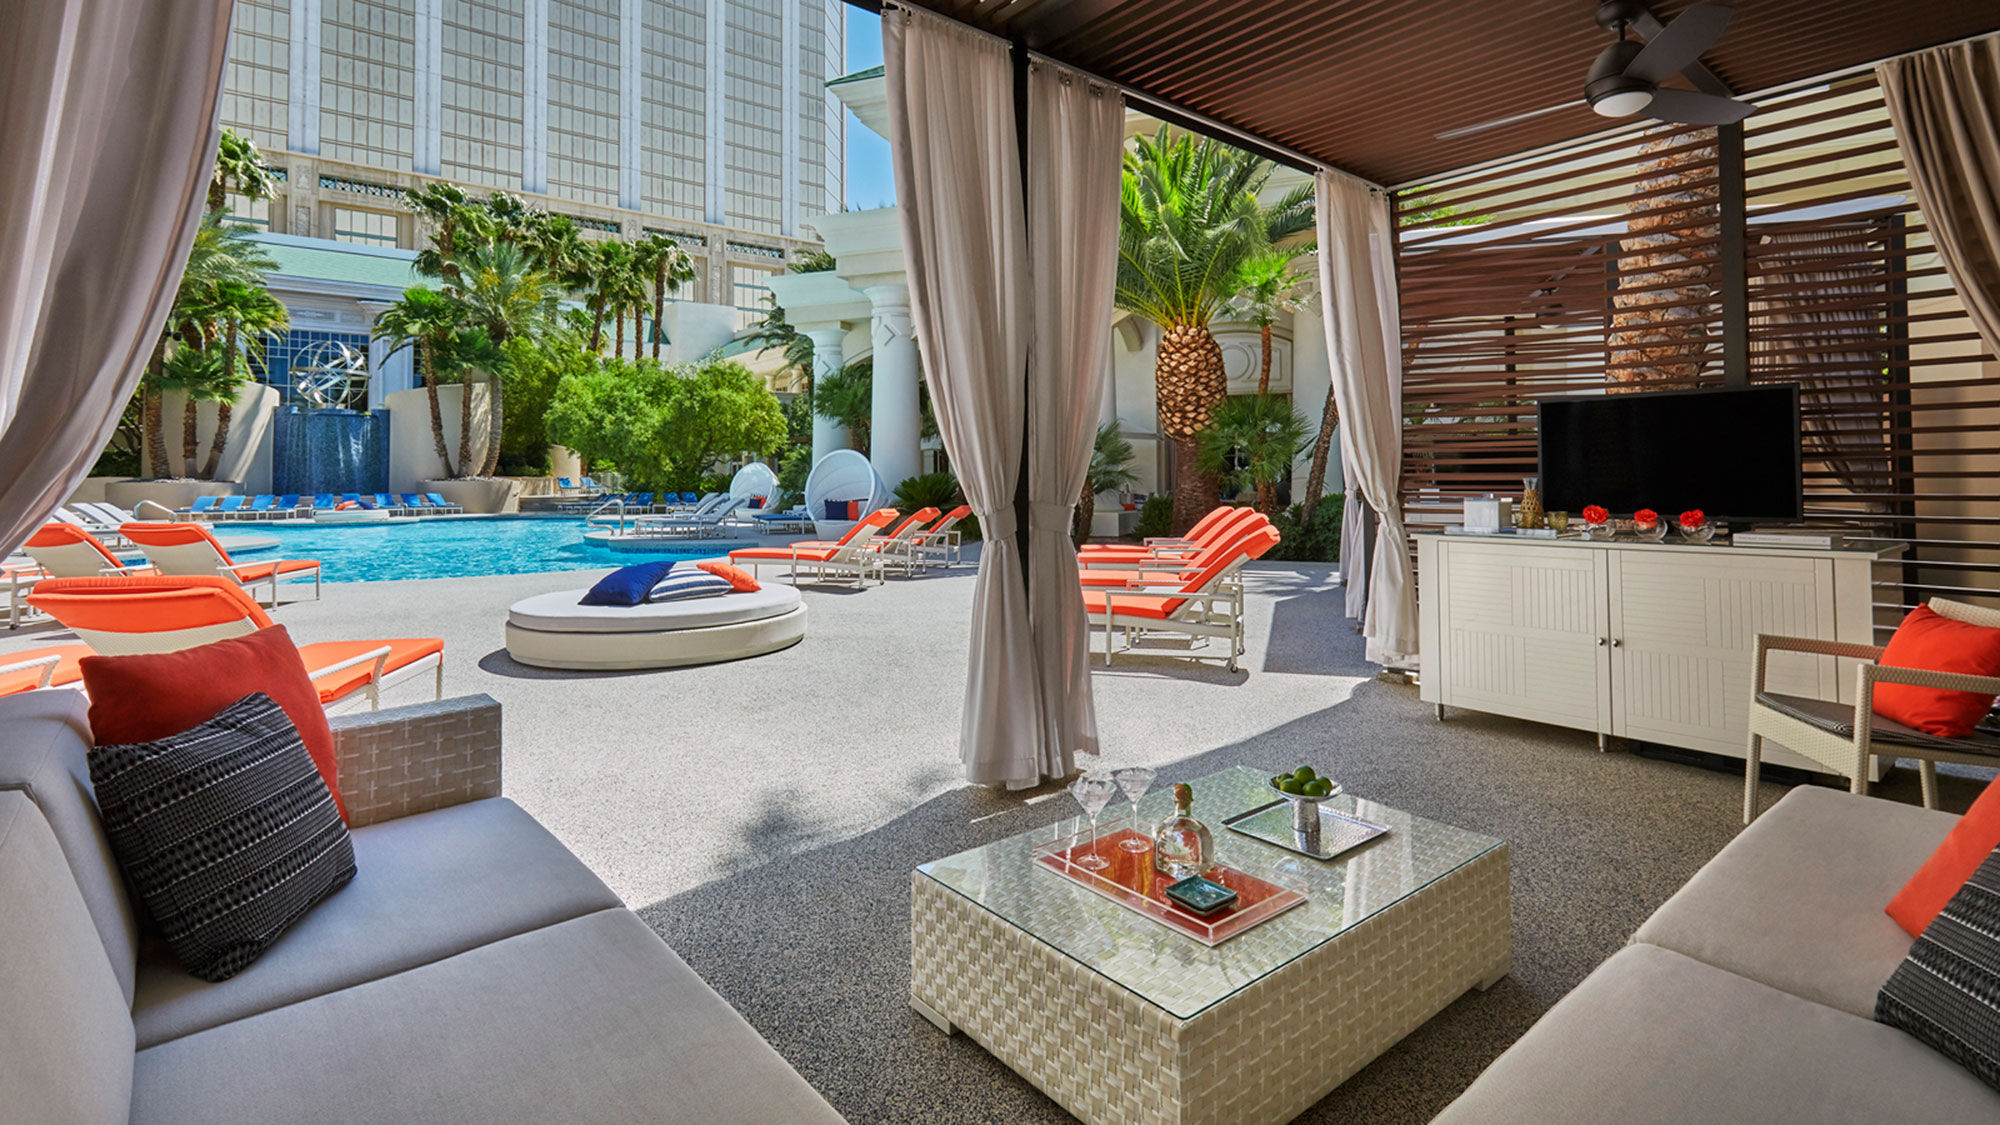 The Four Seasons Hotel Las Vegas has an elevated pool bar menu and private cabana experiences.